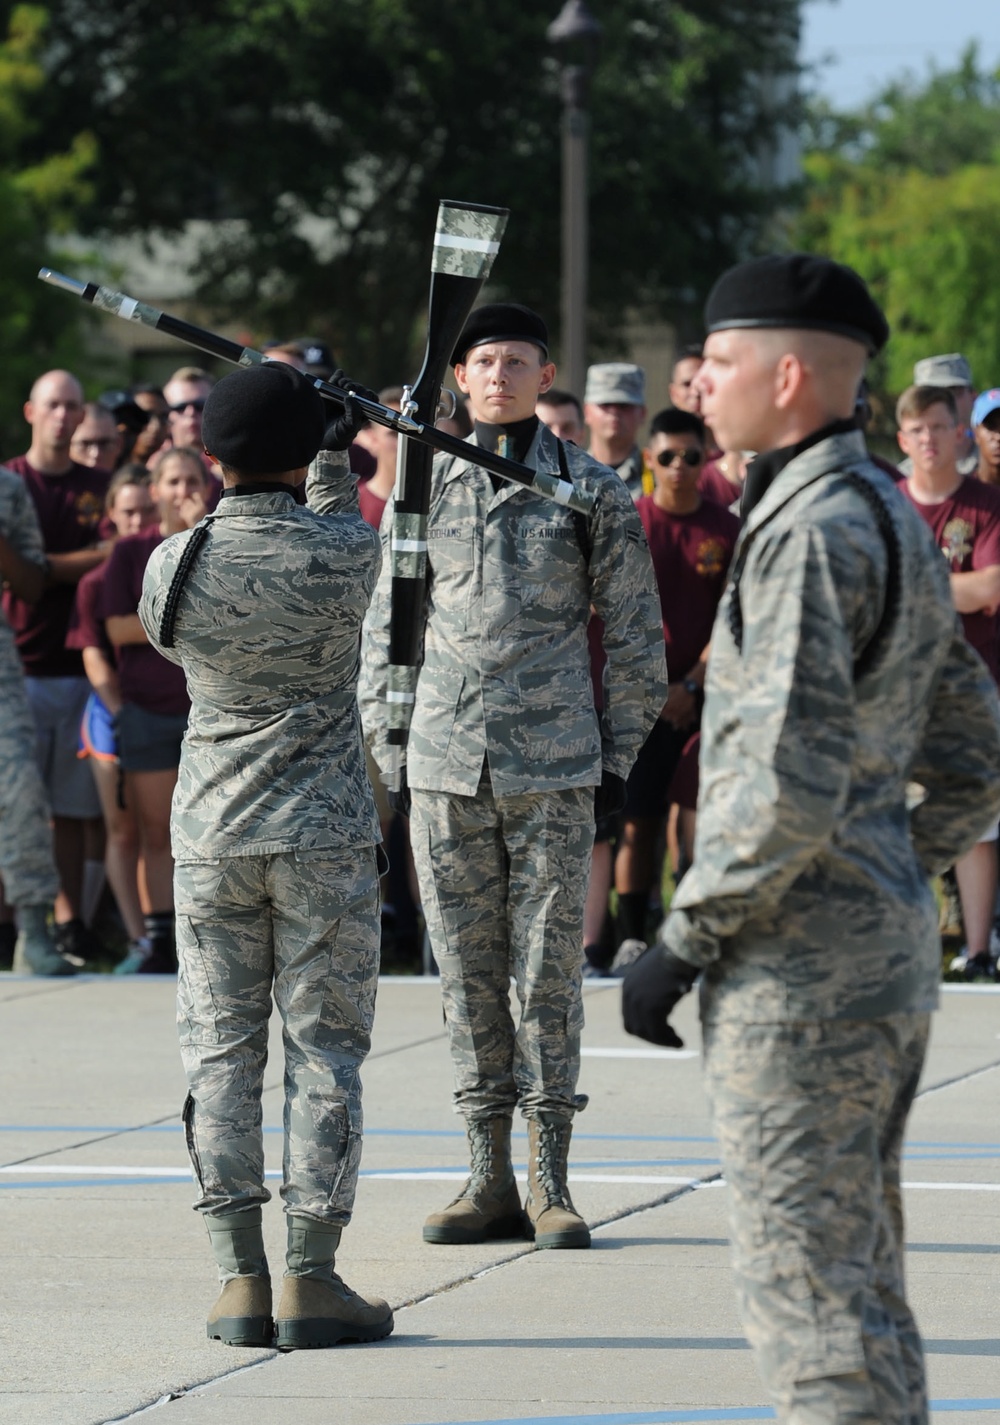 334th TRS gators chomp drill down competition